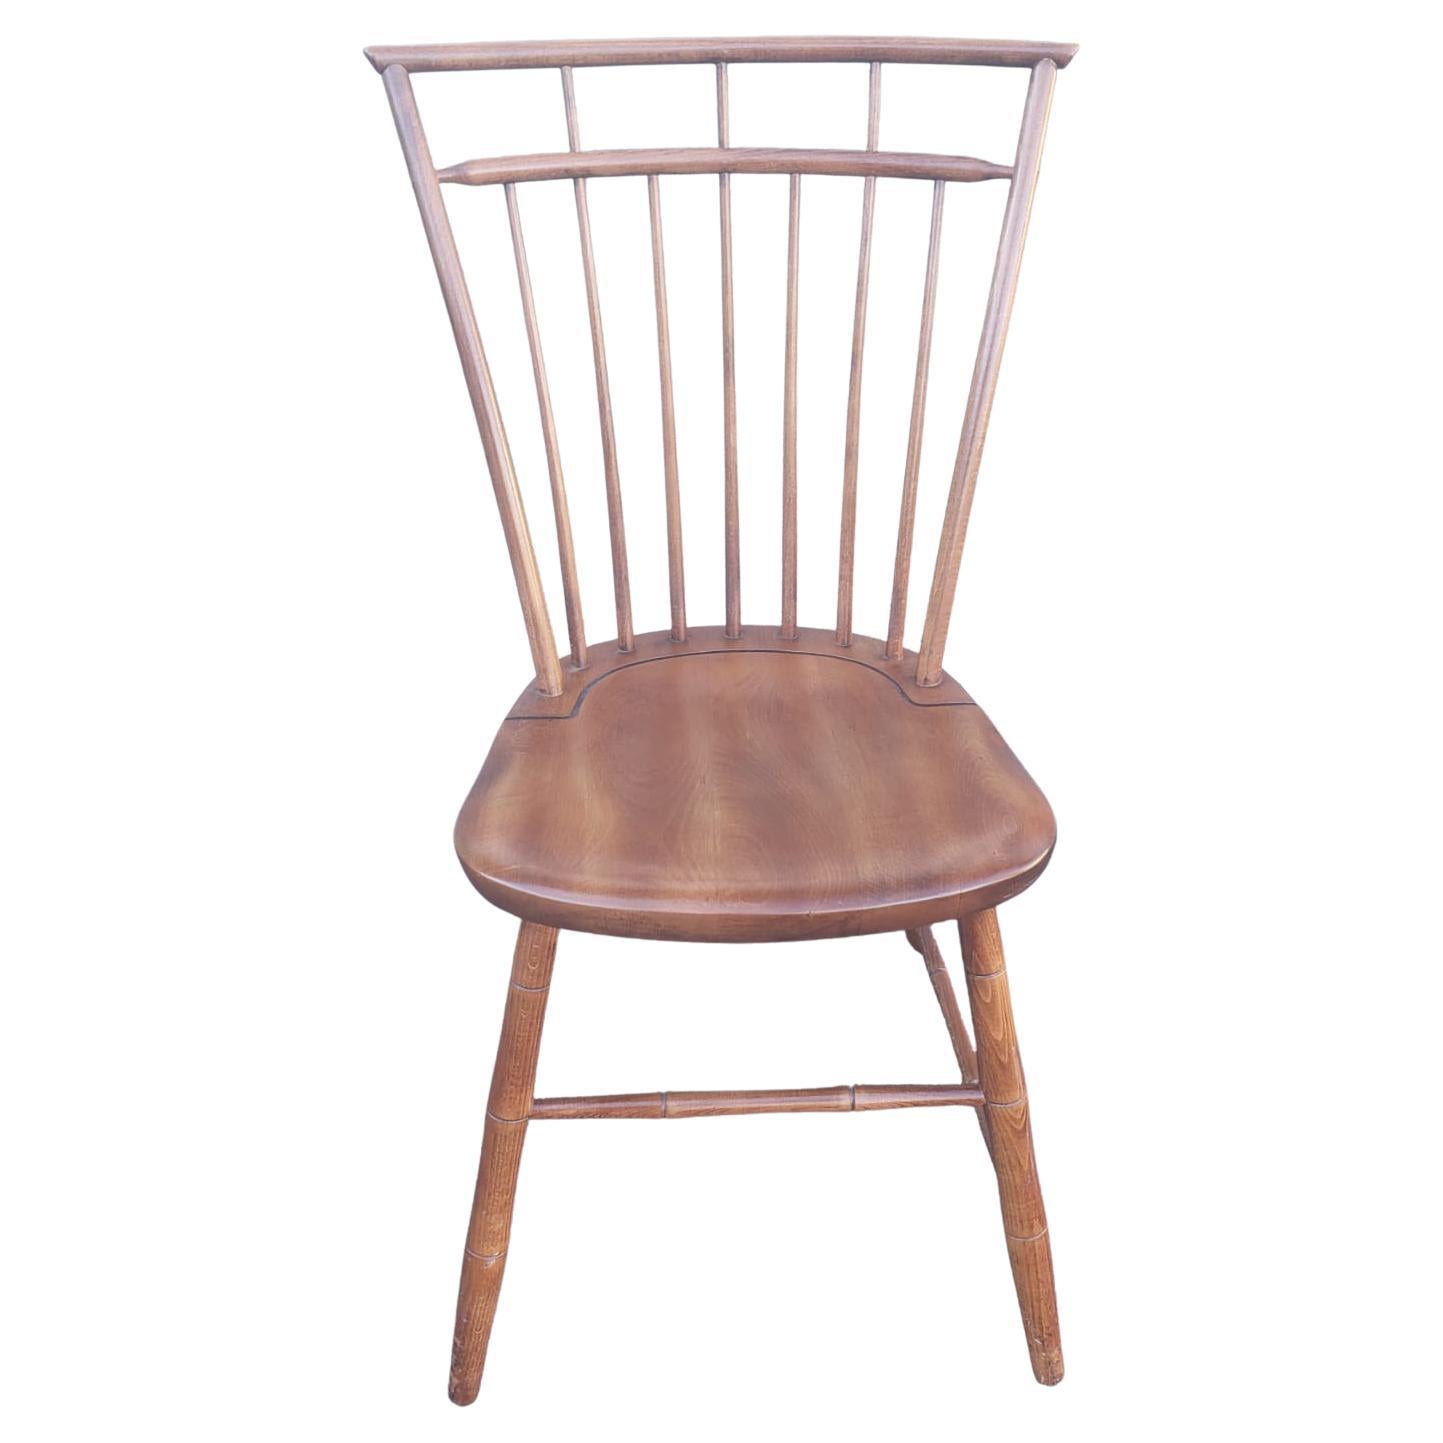 Yugoslavian Faux Bamboo Cherry Windsor Chair, Circa 1970s In Good Condition For Sale In Germantown, MD